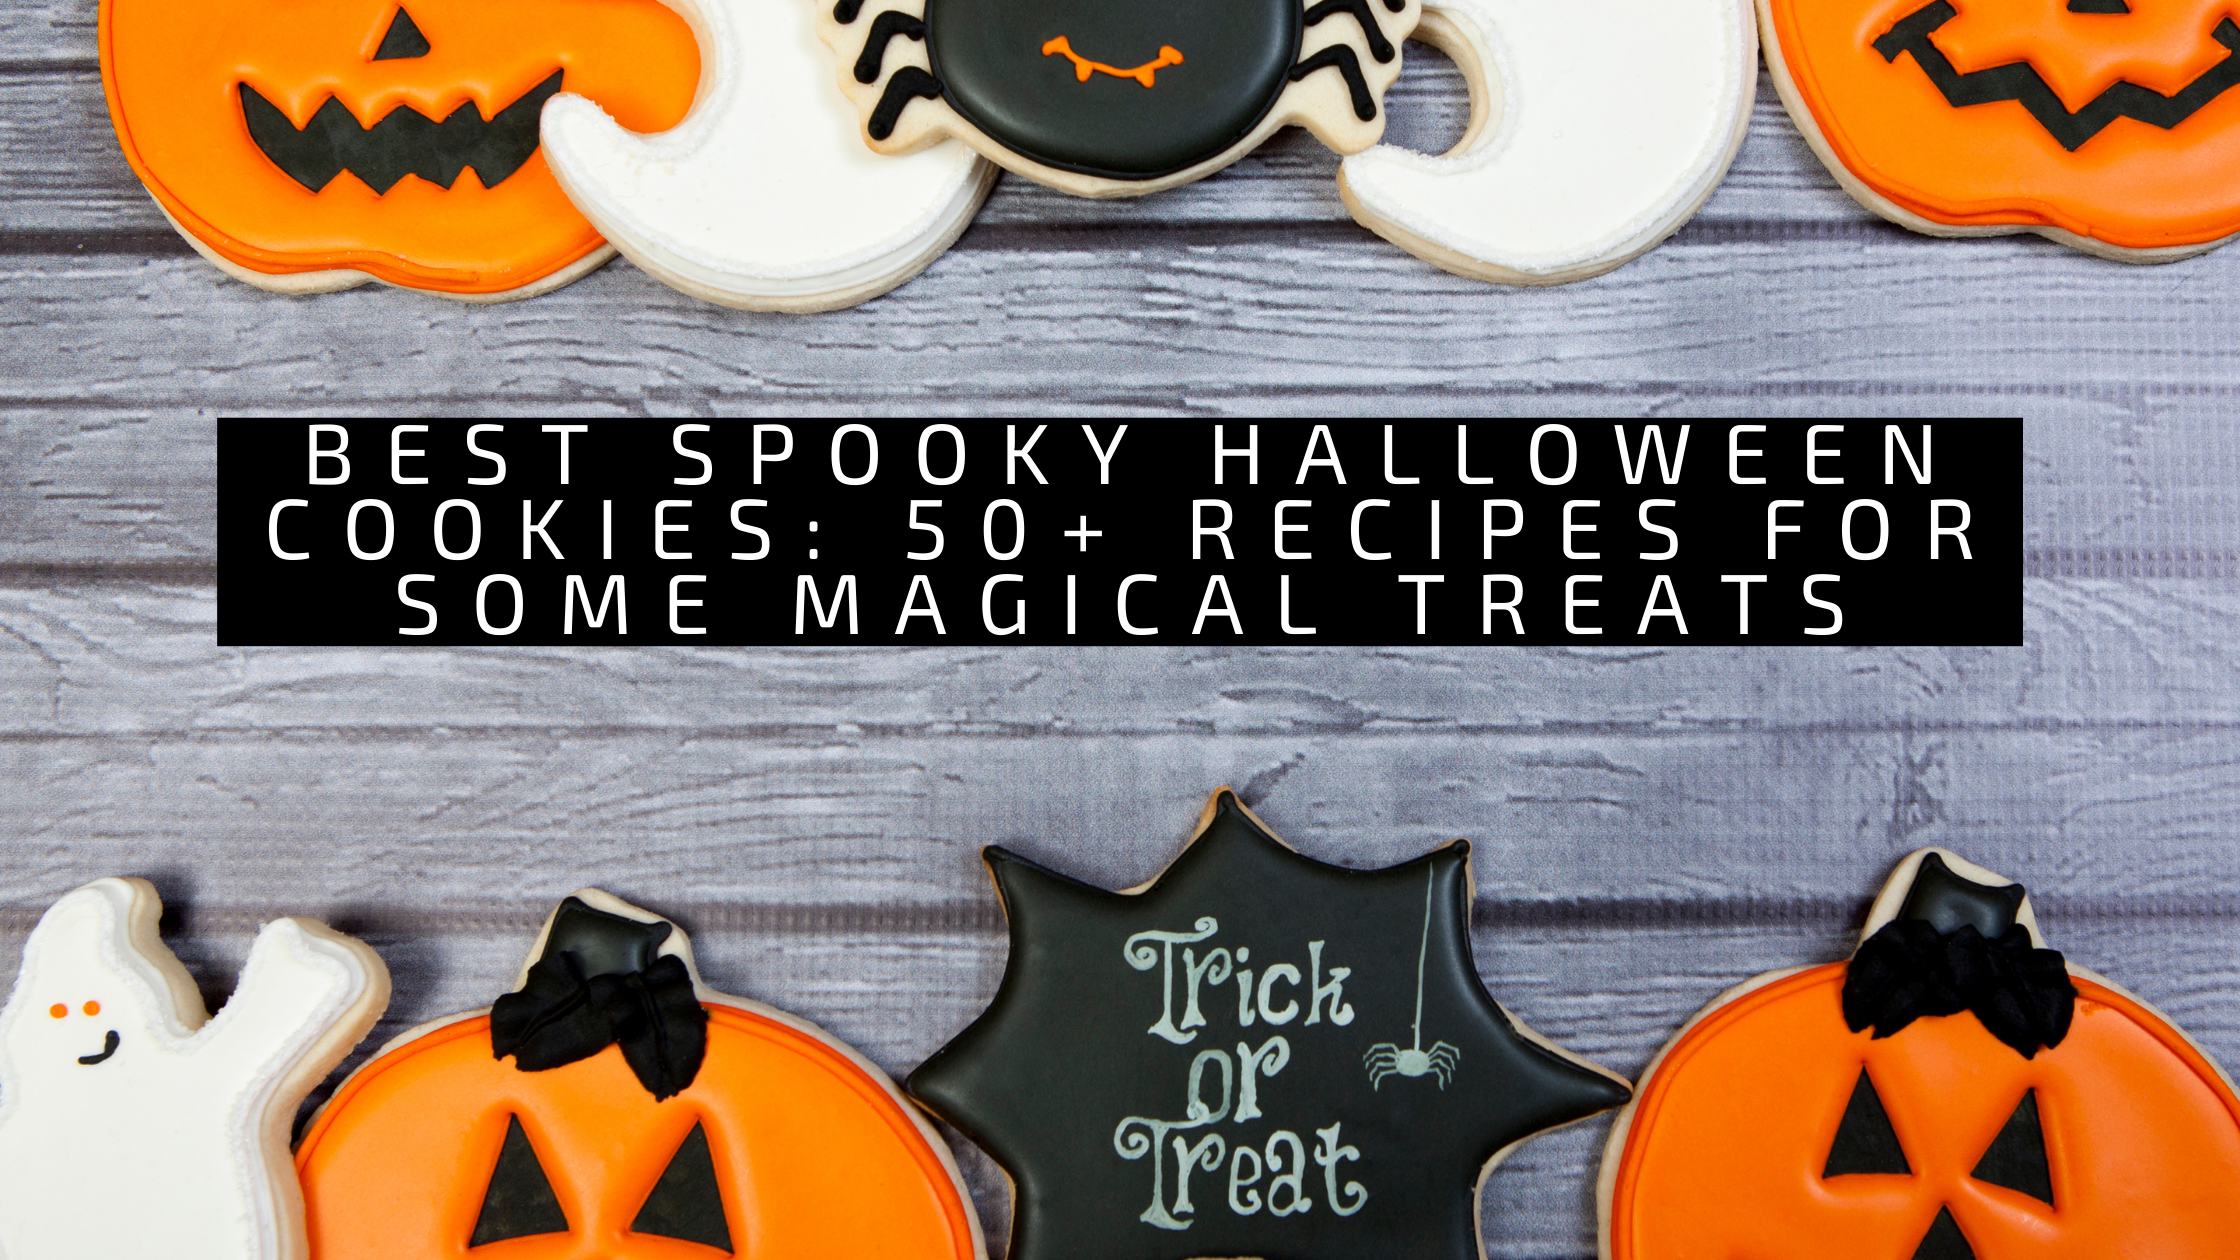 Best Spooky Halloween Cookies: 50+ Recipes for Some Magical Treats 18